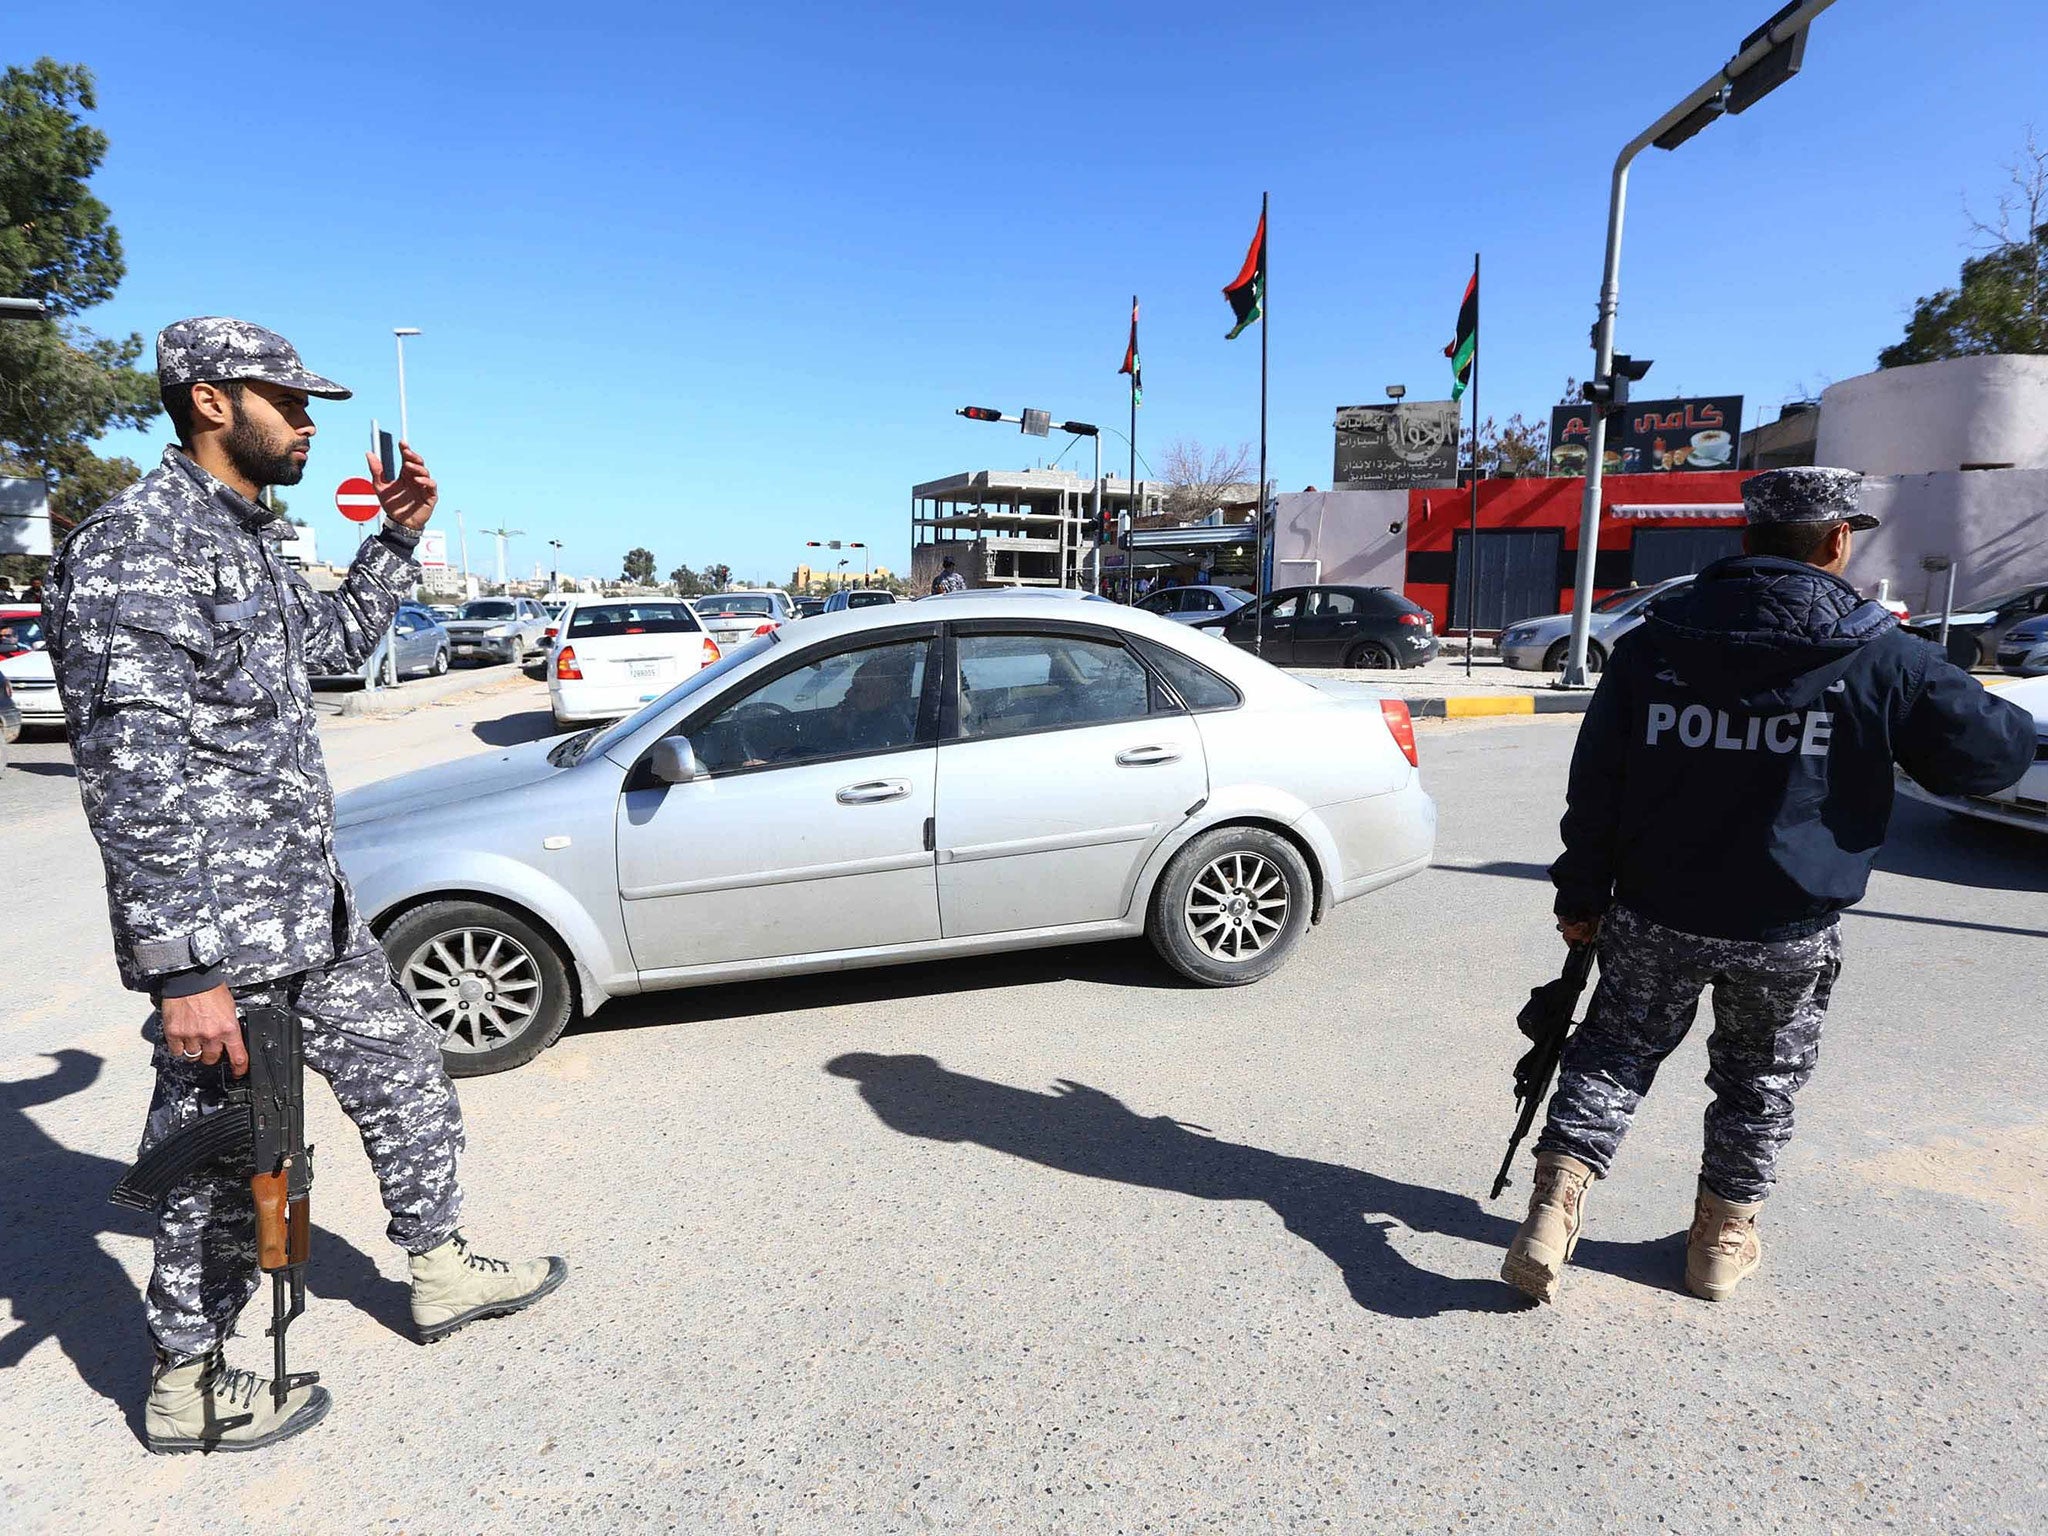 Libyan police officers set up checkpoints in the Libyan capital Tripoli on January 25, 2015 as clashes continue in the west and east of the country